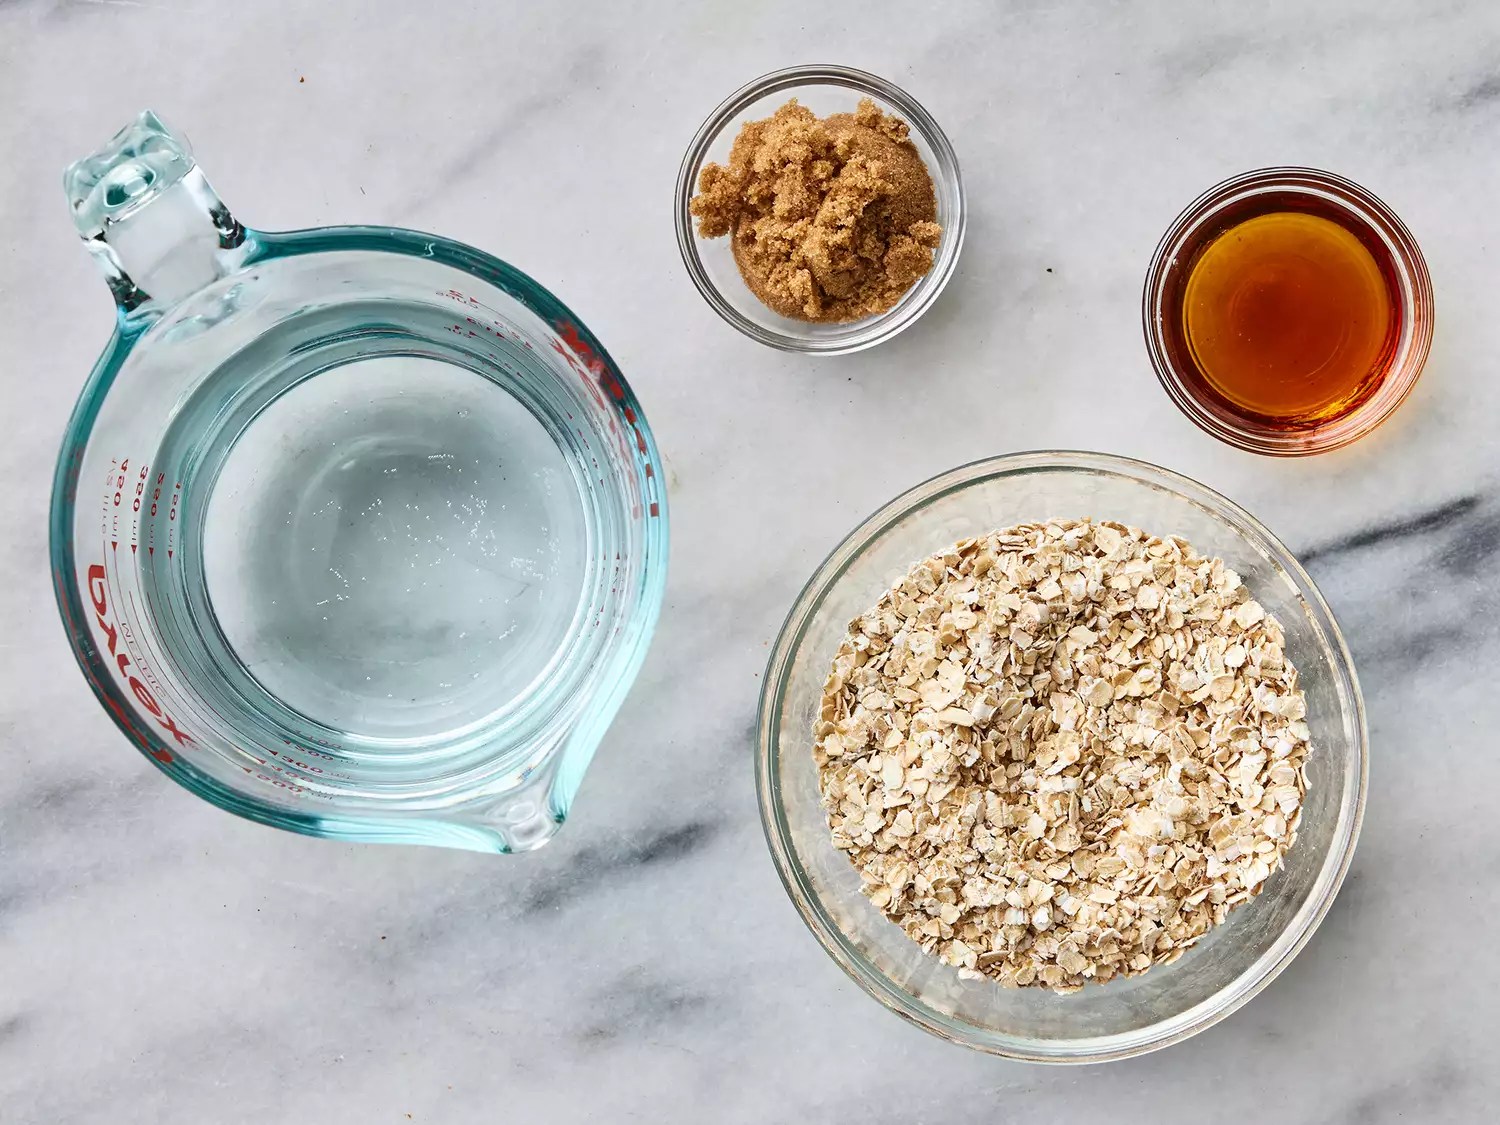 Ultimate Maple and Brown Sugar Oatmeal Recipe: It’s a